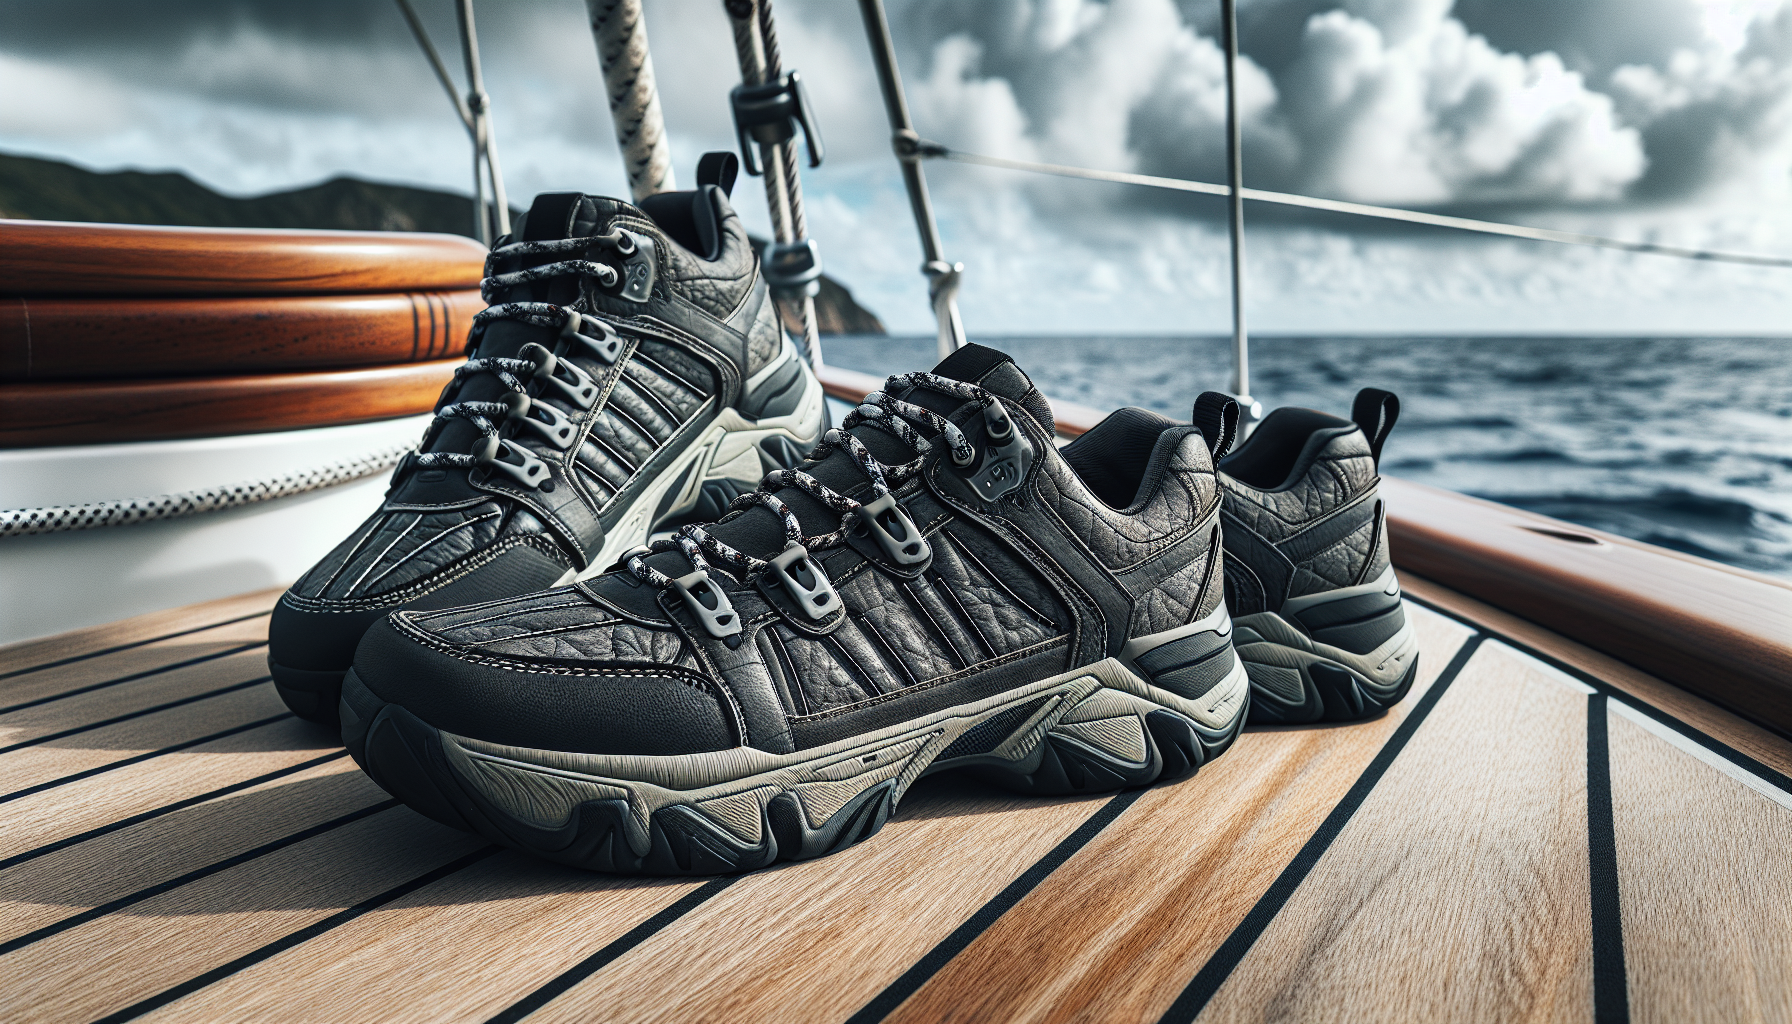 Specialized sailing shoes for offshore adventures